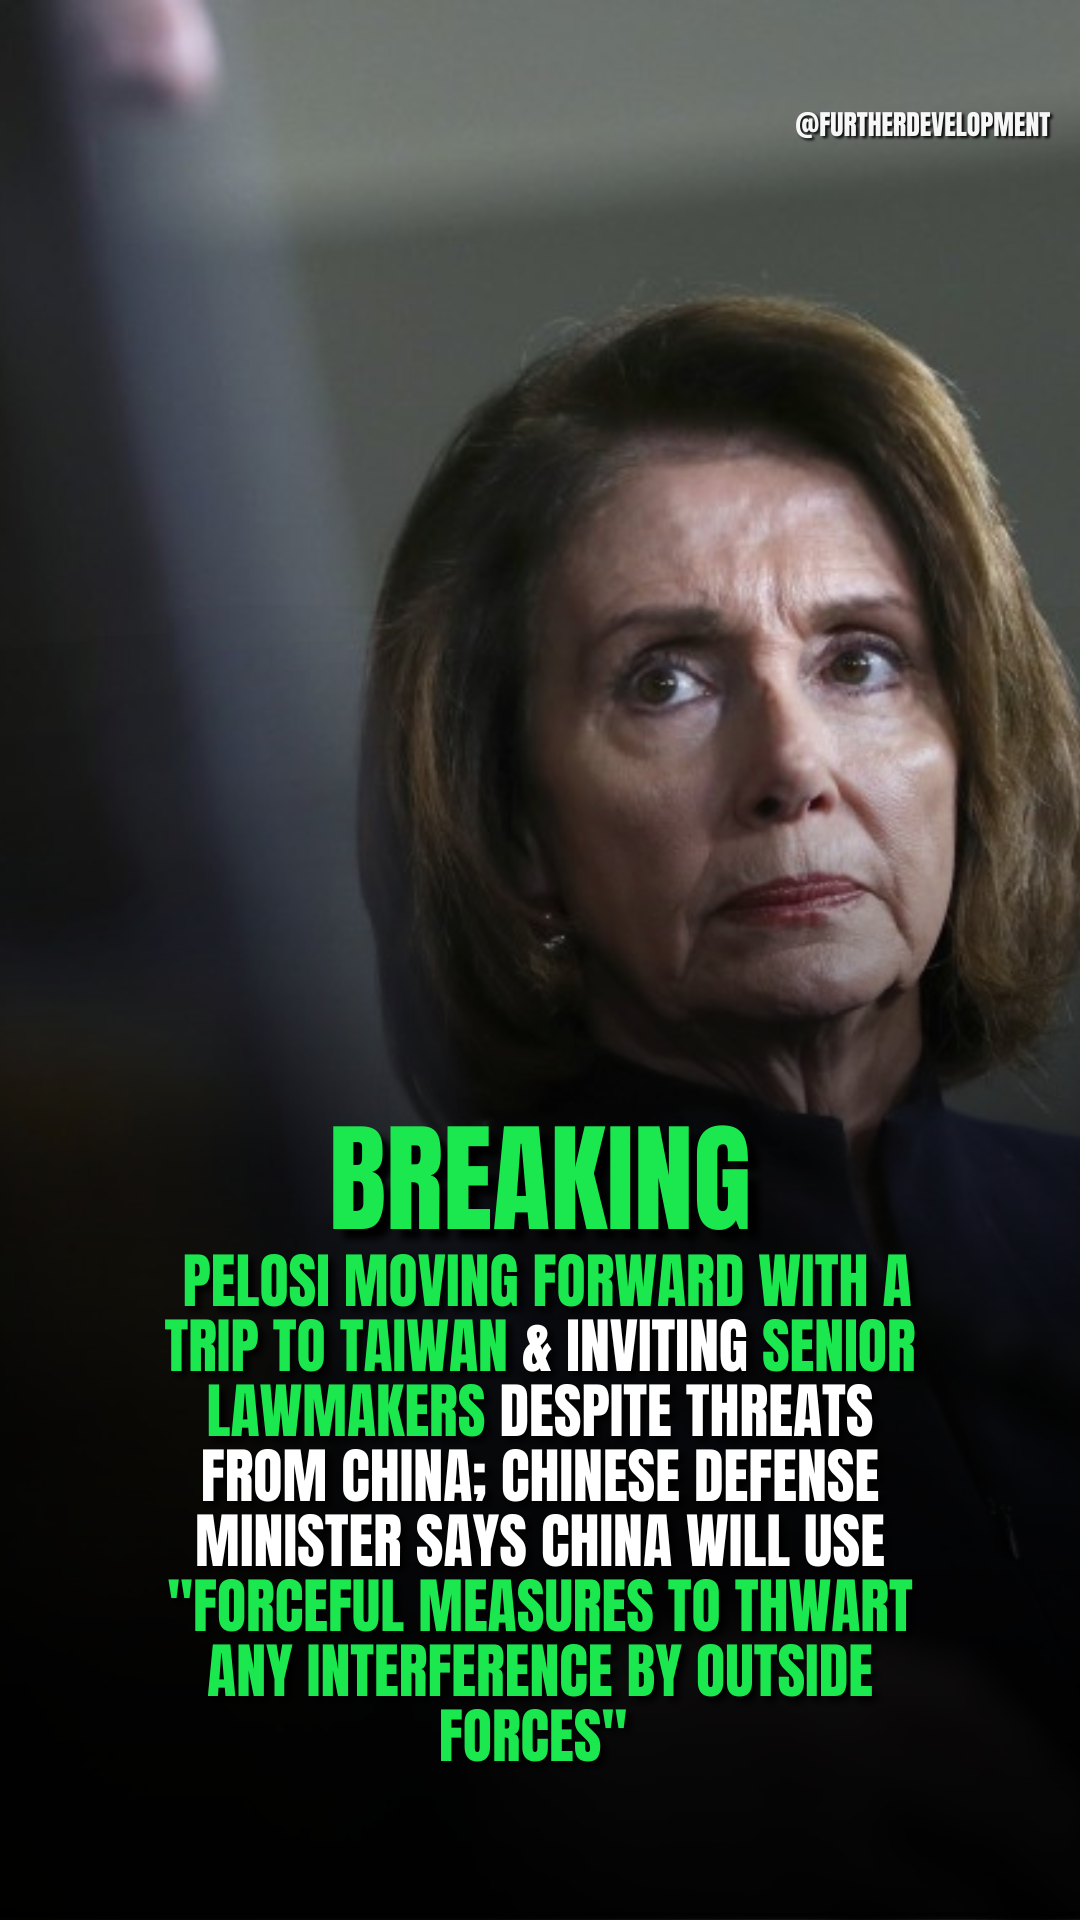 Pelosi moving forward with a trip to Taiwan & inviting senior lawmakers despite threats from China; Chinese Defense Minister says China will use "forceful measures to thwart any interference by outside forces"